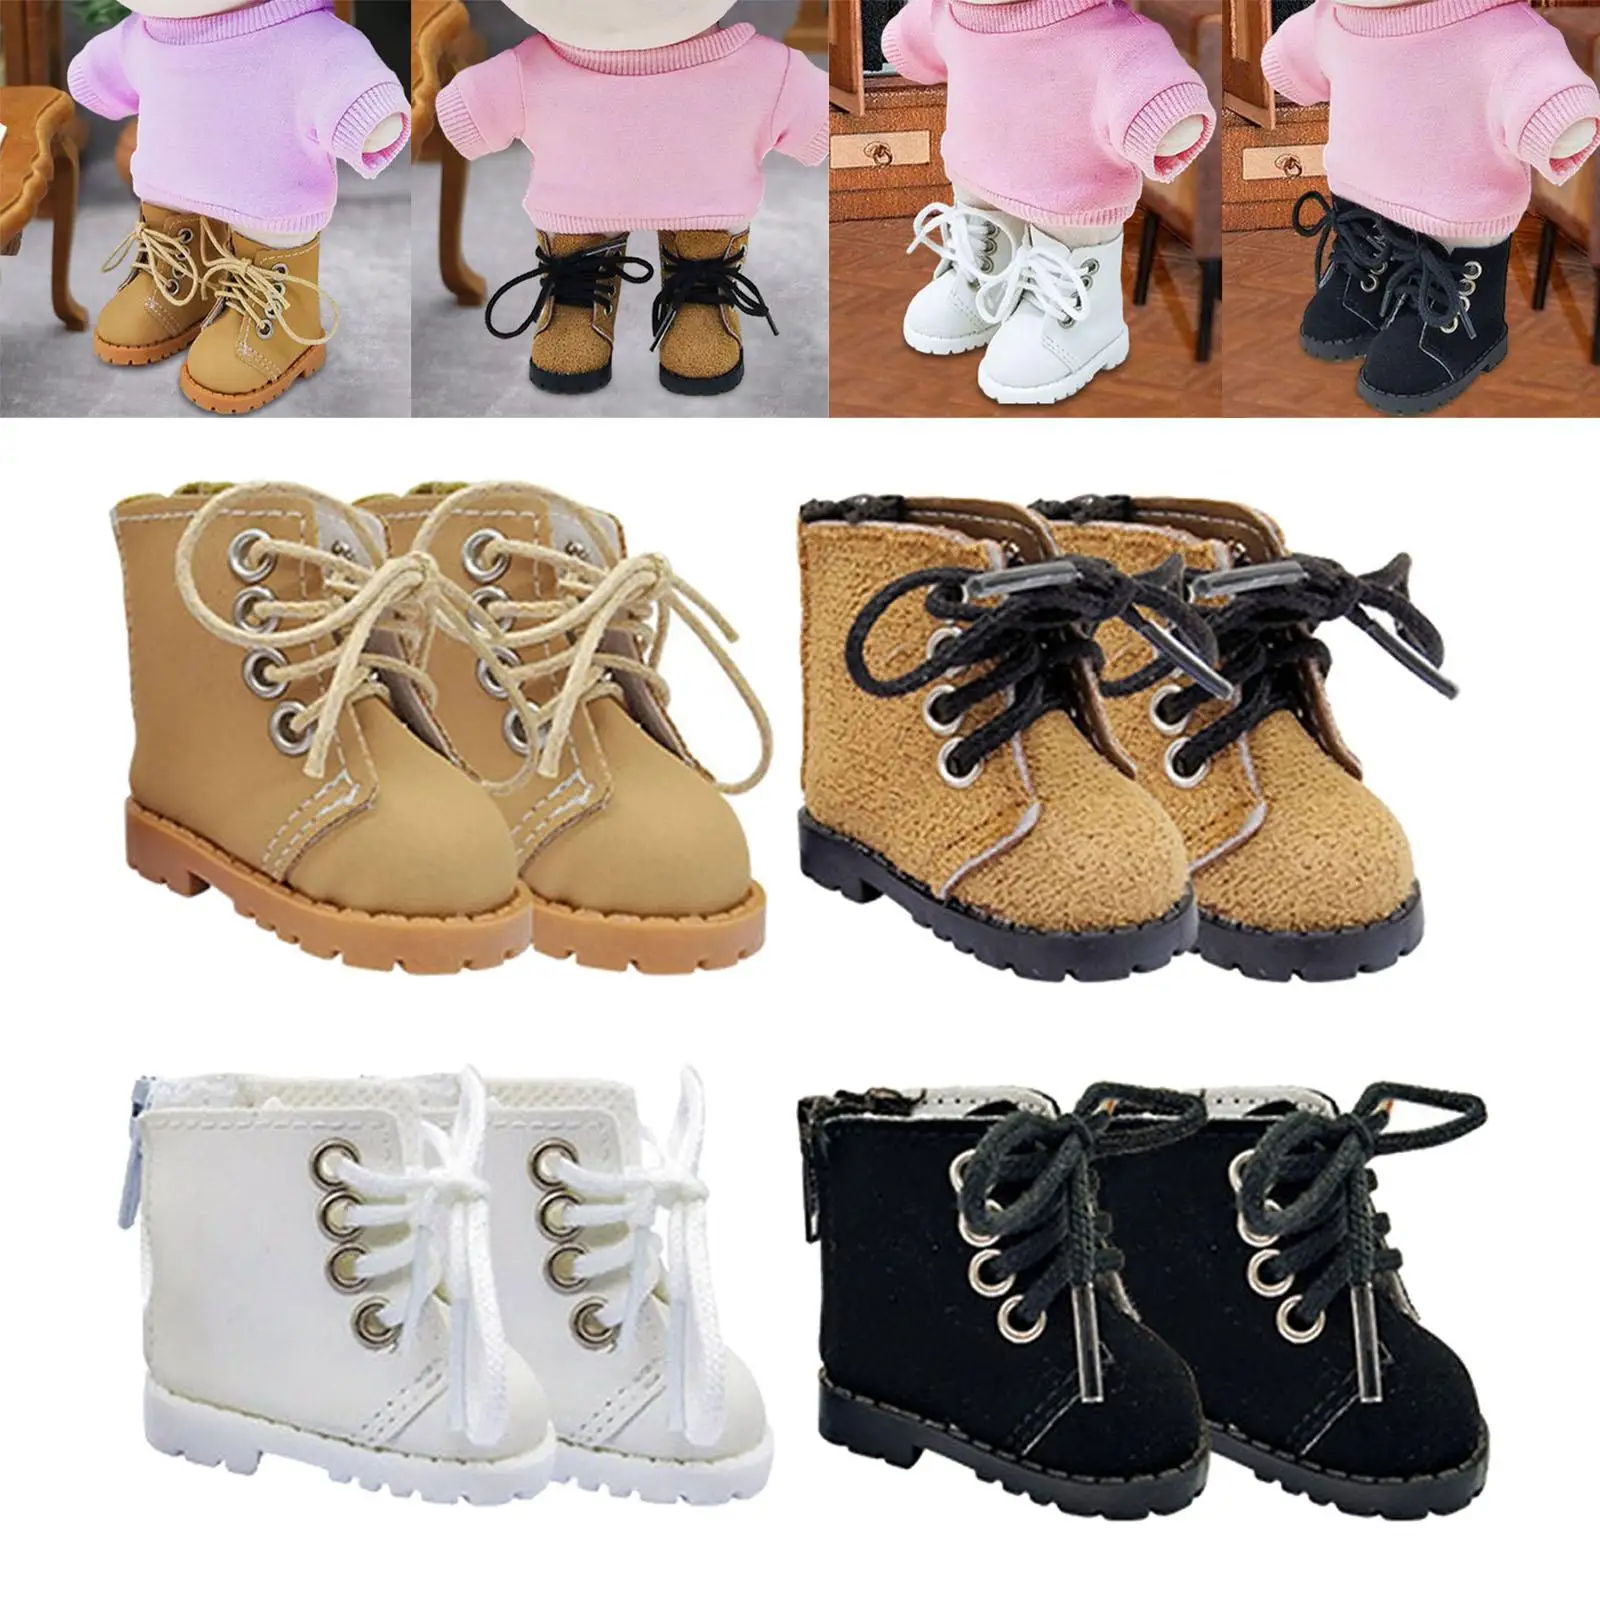 1 Pair 1/6 Doll Shoes Decor Kids Toys Accessory Handmade Boots Miniature Model for 20cm Ball Jointed Dolls Dress up DIY Gift